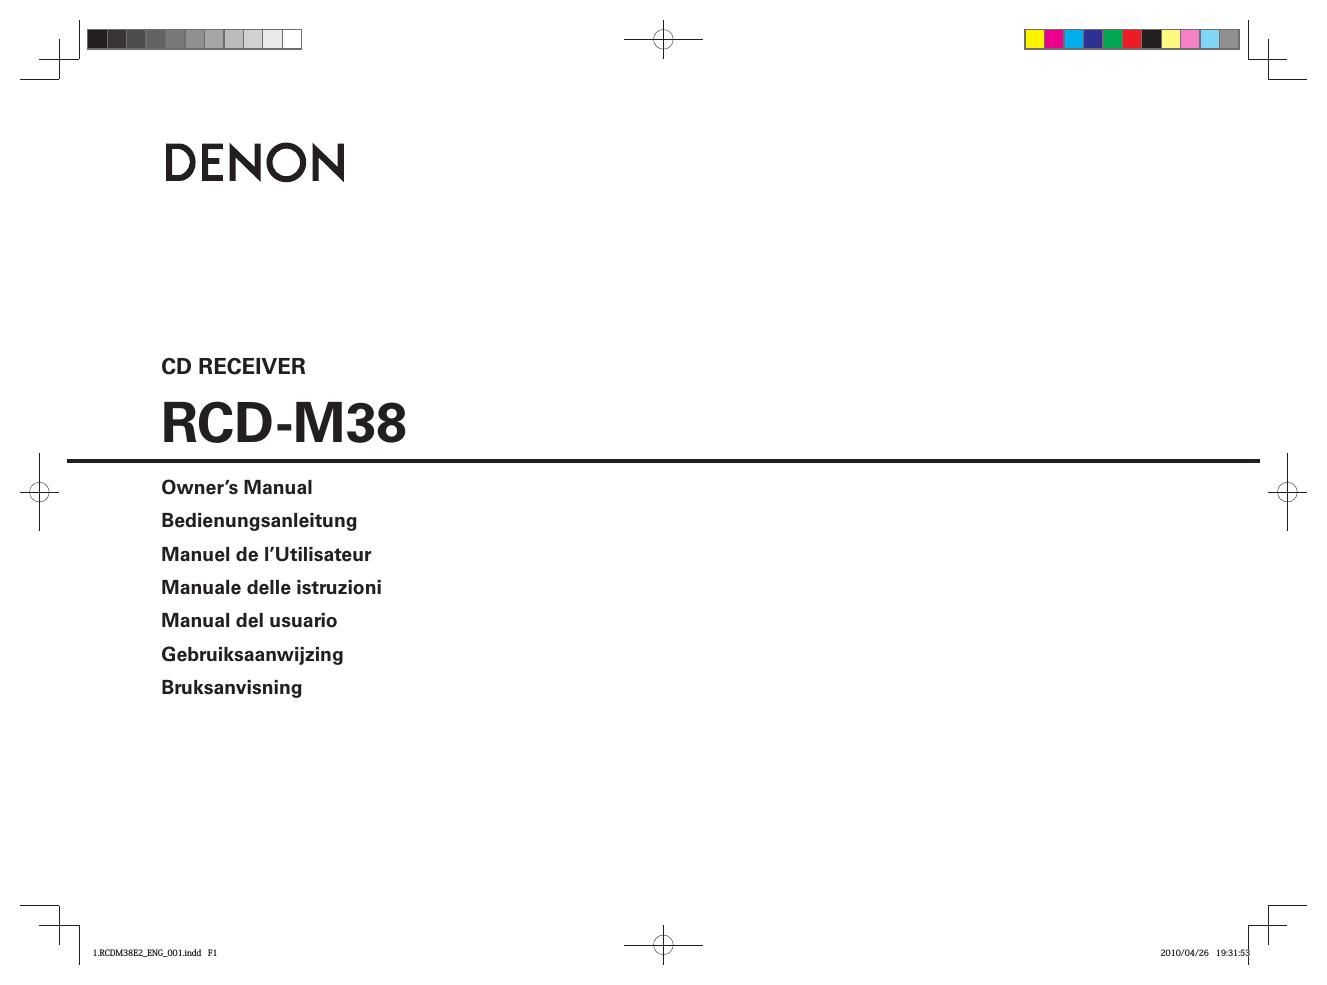 Denon RCD M38 Owners Manual